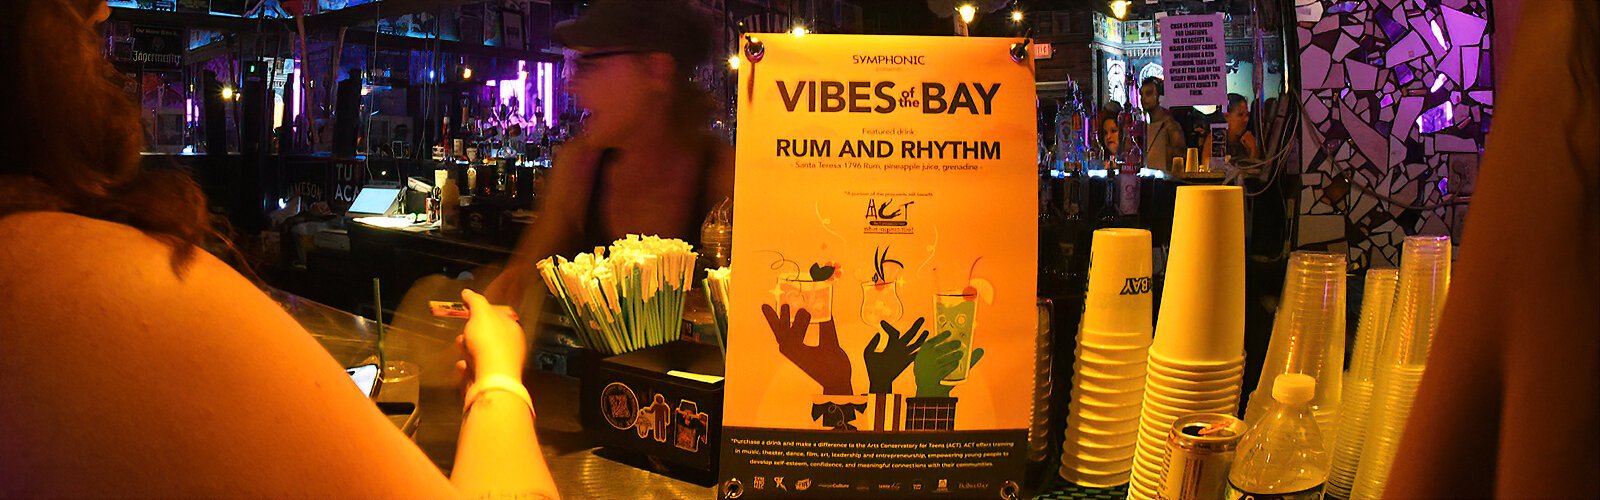 Rum and rhythm provided joyful vibes at Crowbar in Ybor City as the establishment celebrated Symphonic Distribution's seventh Vibes of the Bay festival.